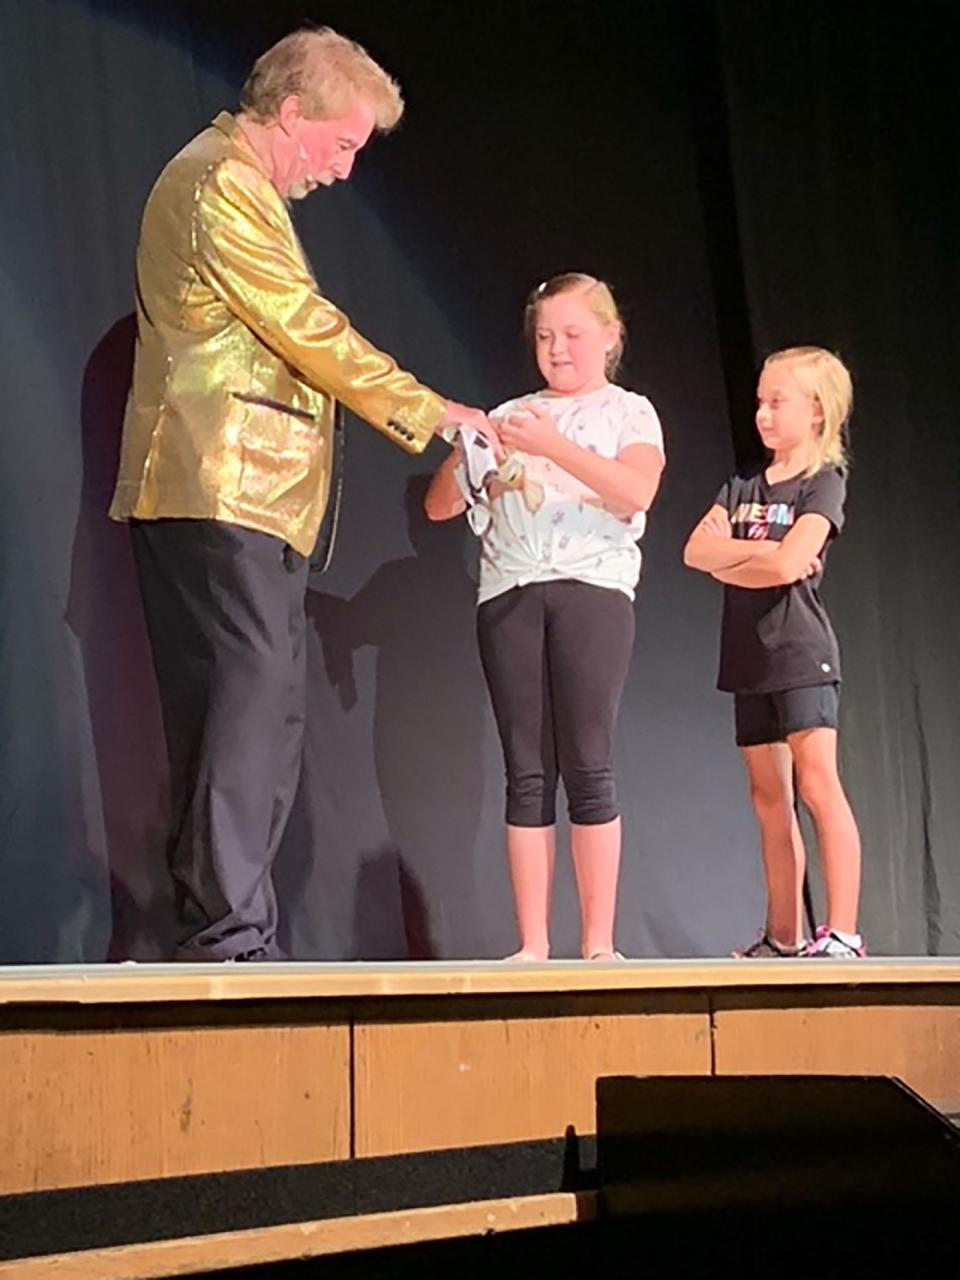 Magician David Seebach gets help from Niles residents Libby and Ella Cornelius during a card trick at Saturday's showcase performance at Colon High School. The four-day Abbott's Magic Get-Together concluded Saturday.